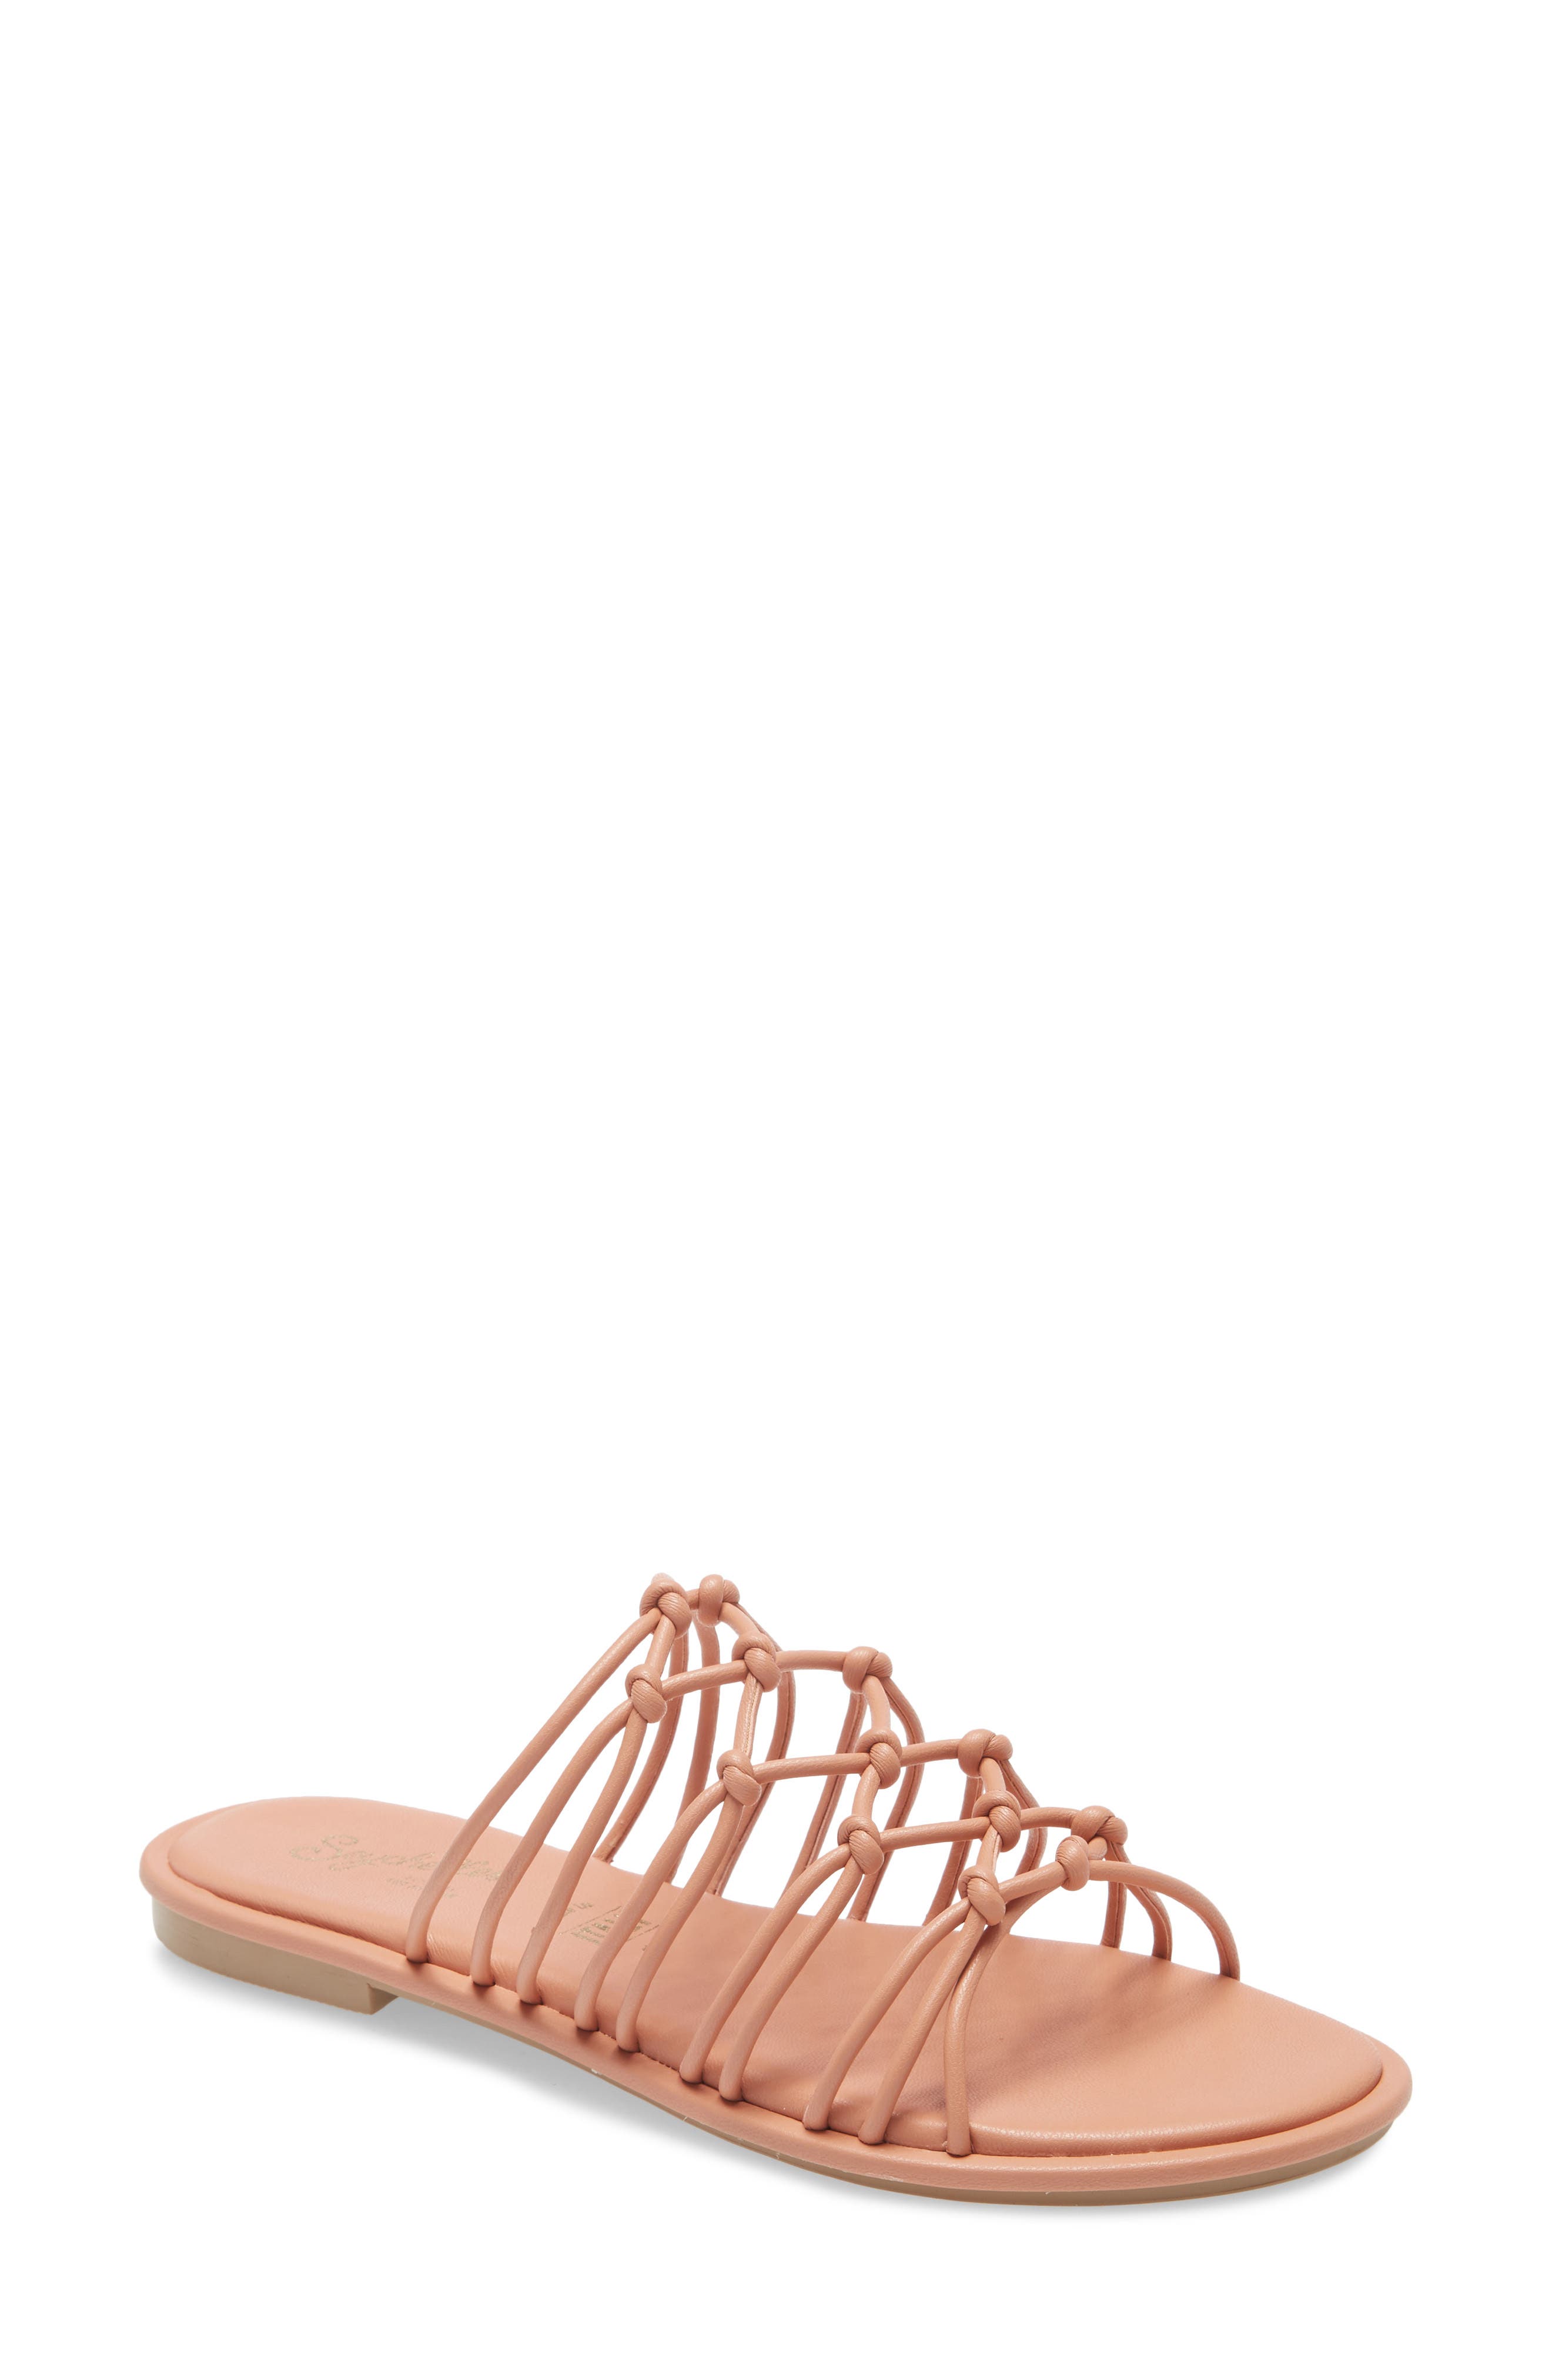 Seychelles Authentic Slide Sandal In Coral Faux Leather